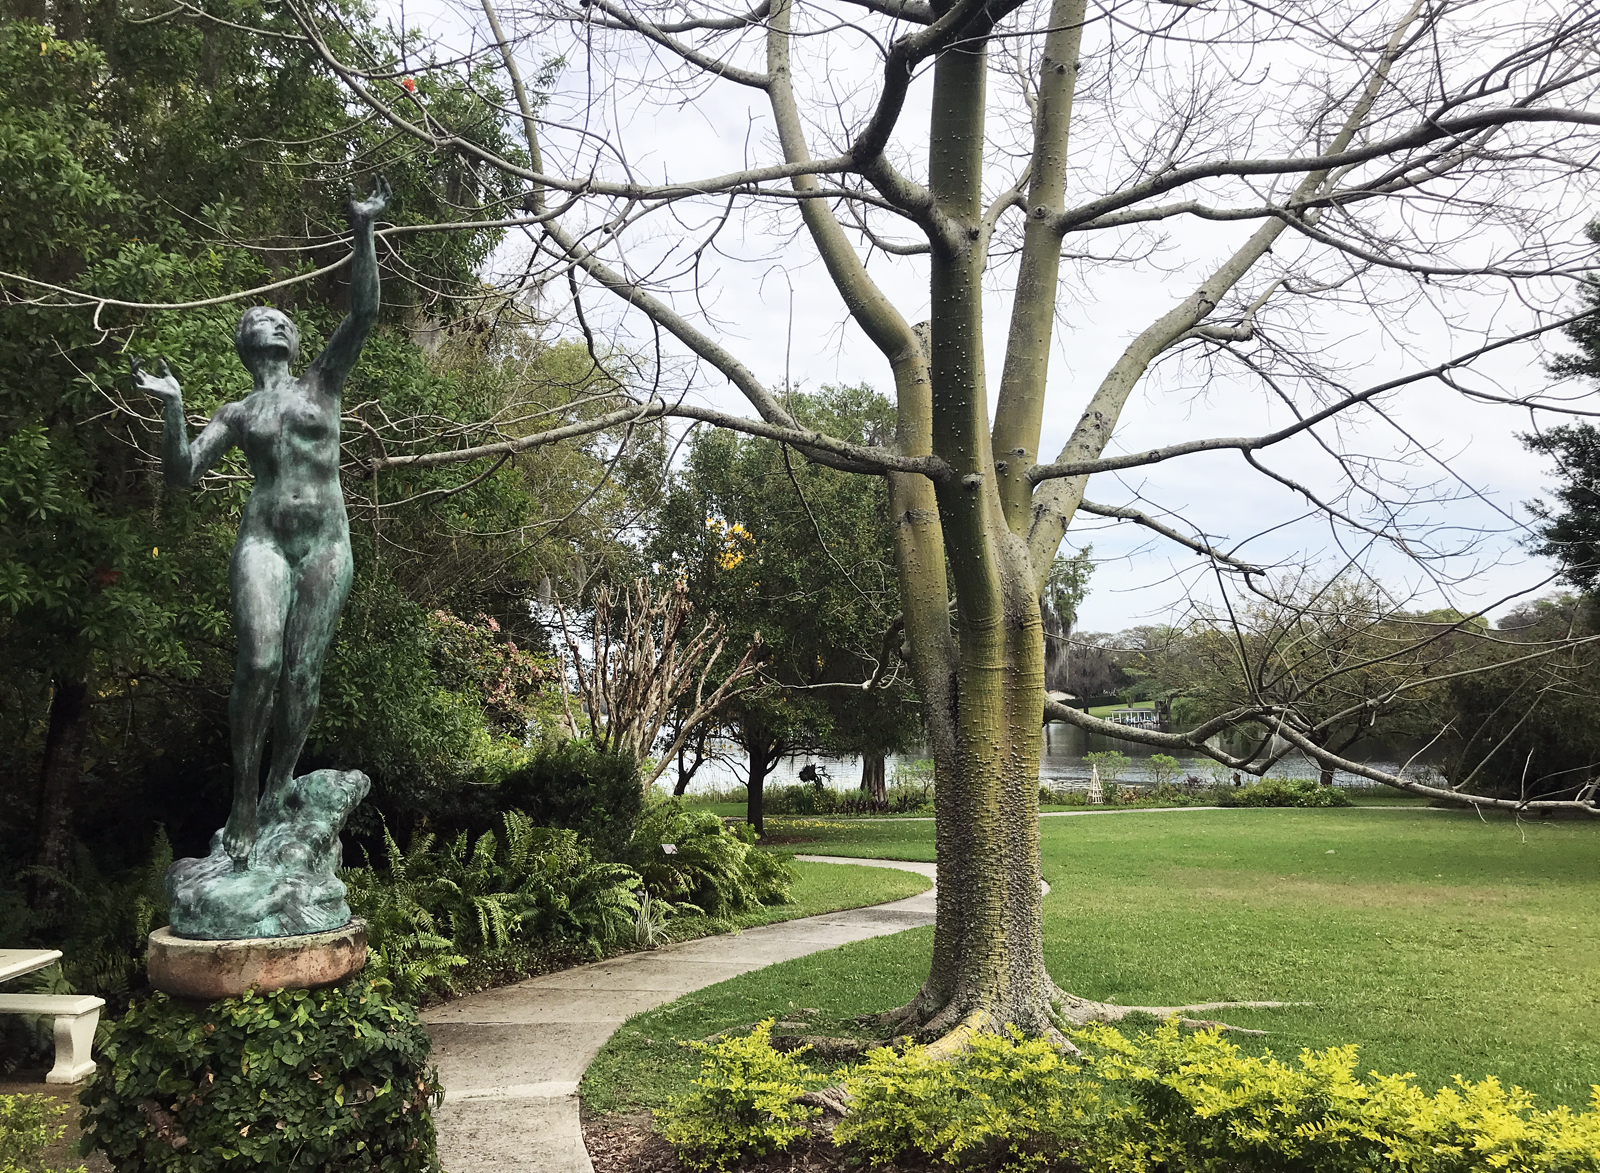 Things to do in Winter Park: The Albin Polasek Museum and Sculpture Garden has grounds full of sculpture and trees with terrific views of Lake Osceola. (Photo Bonnie Gross)